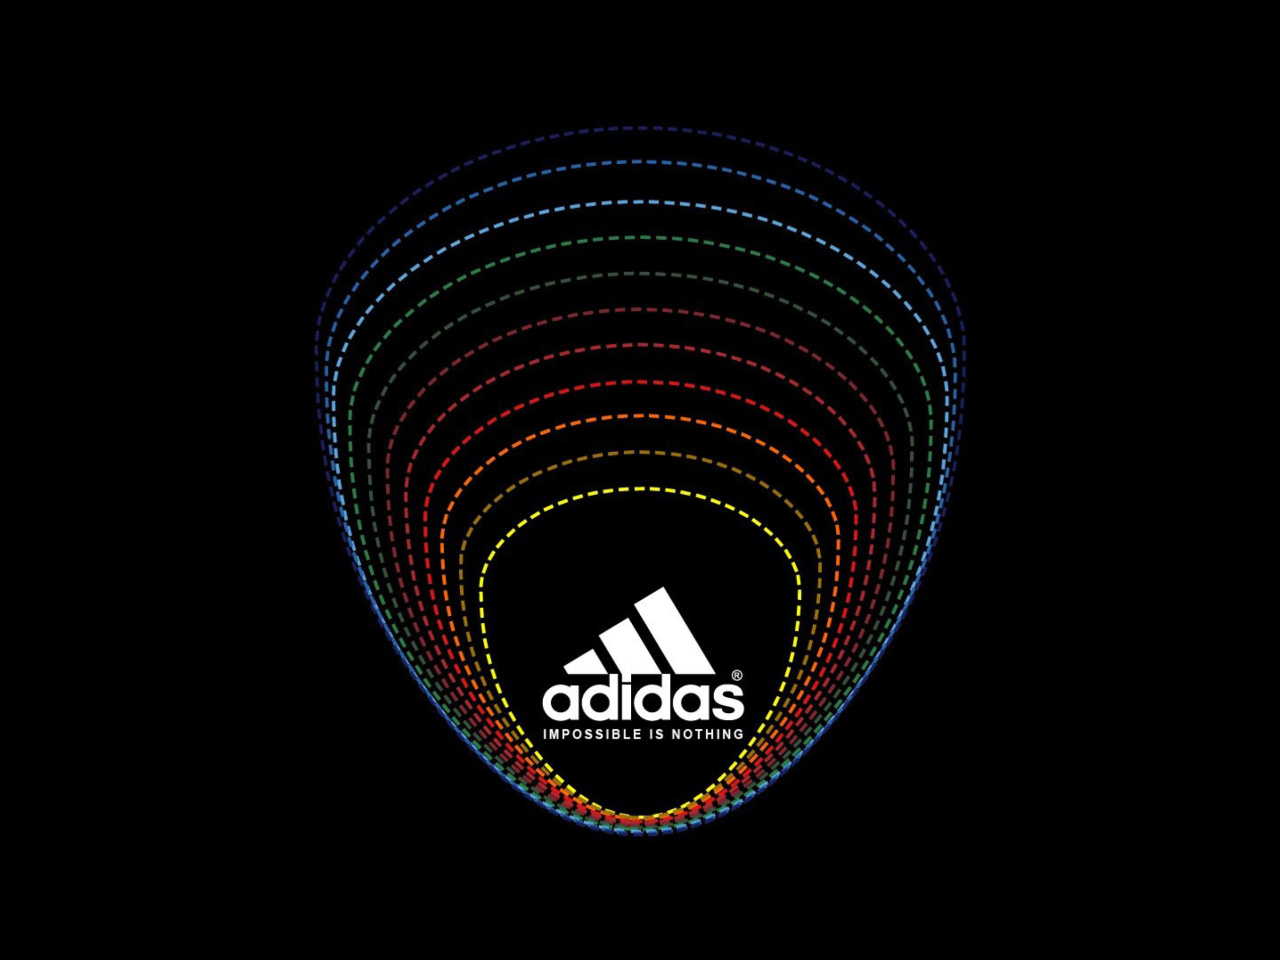 Das Adidas Tagline, Impossible is Nothing Wallpaper 1280x960